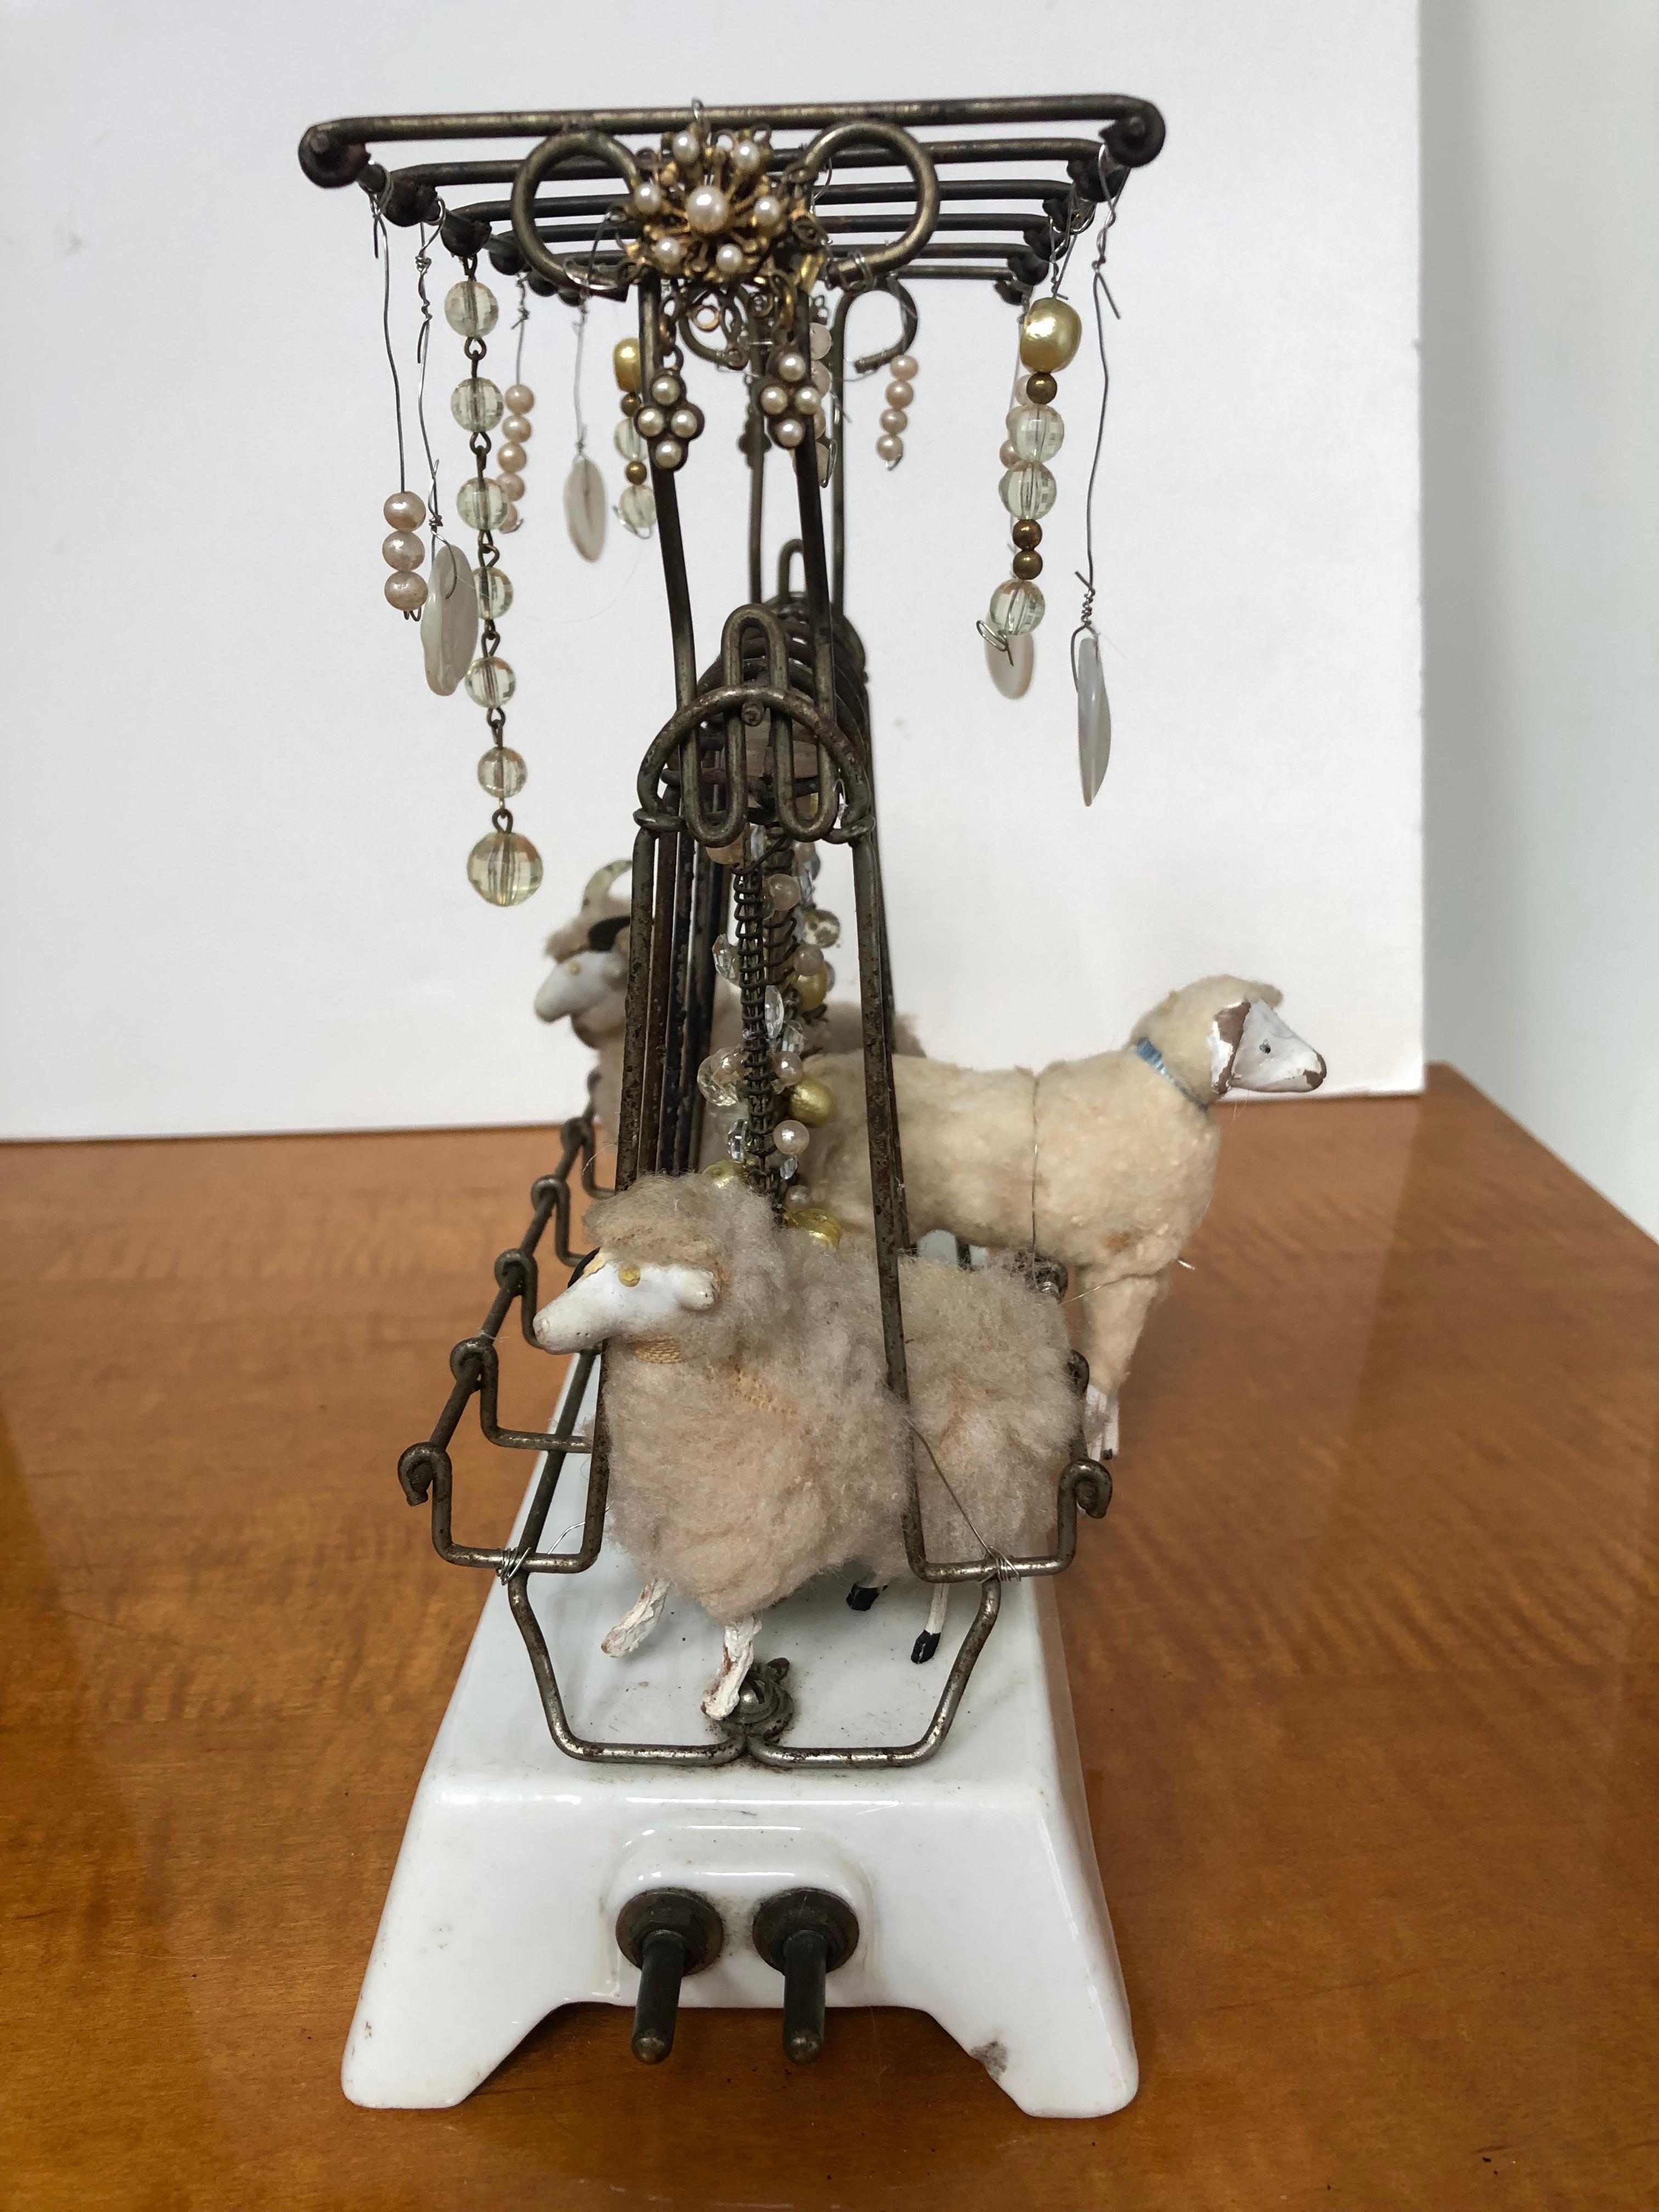 Contemporary Whimsical Original Mixed Media Tabletop Sculpture on Vintage Toaster For Sale